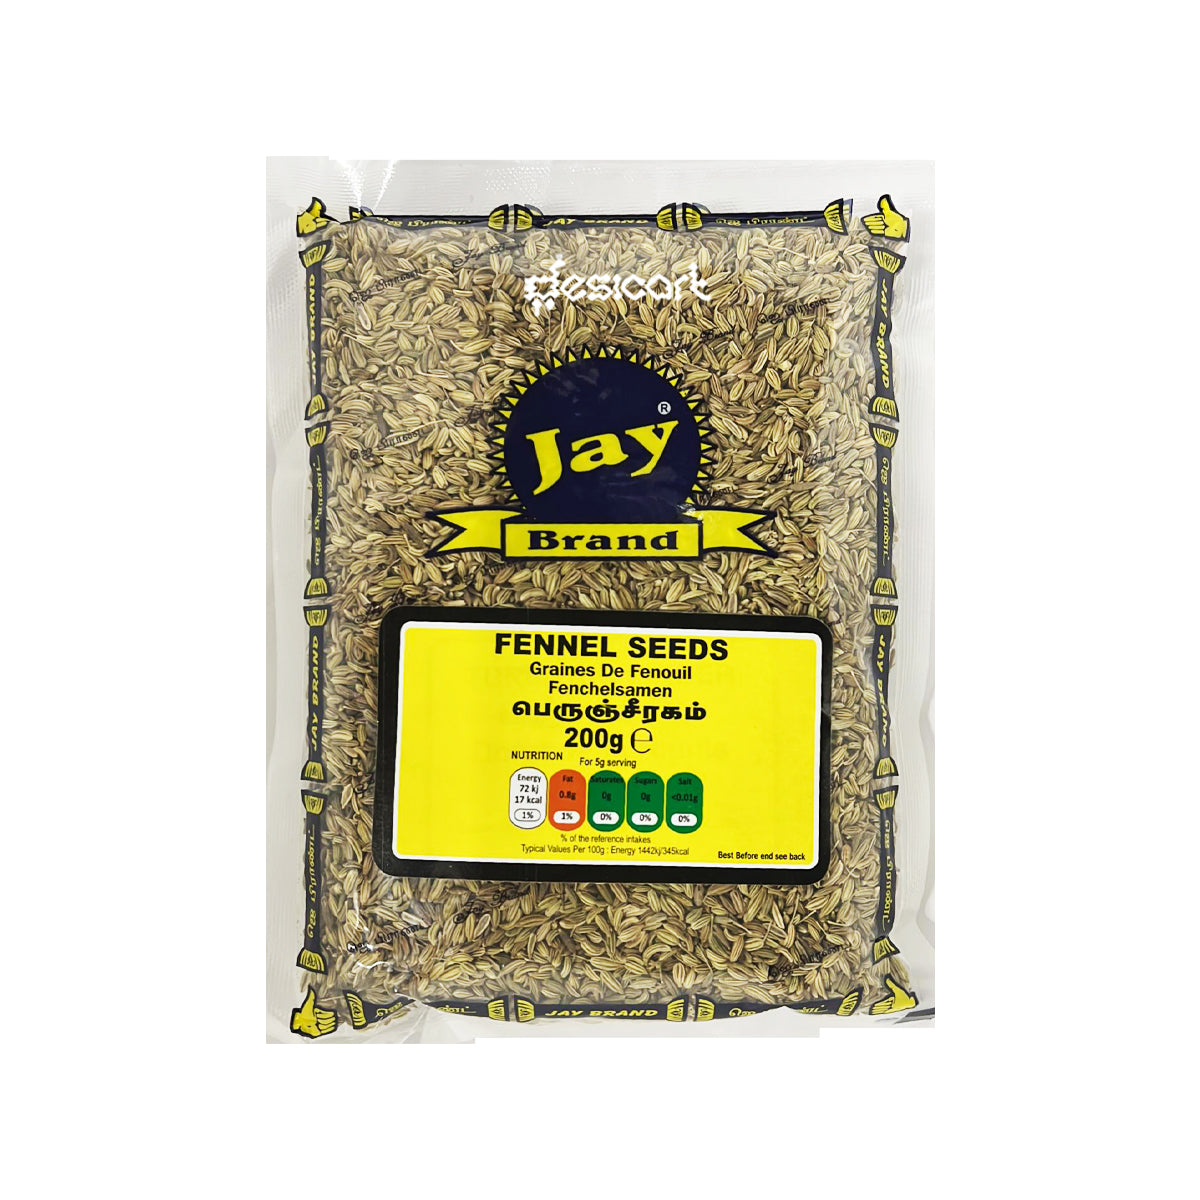 Jay Brand Fennel Seeds 200g